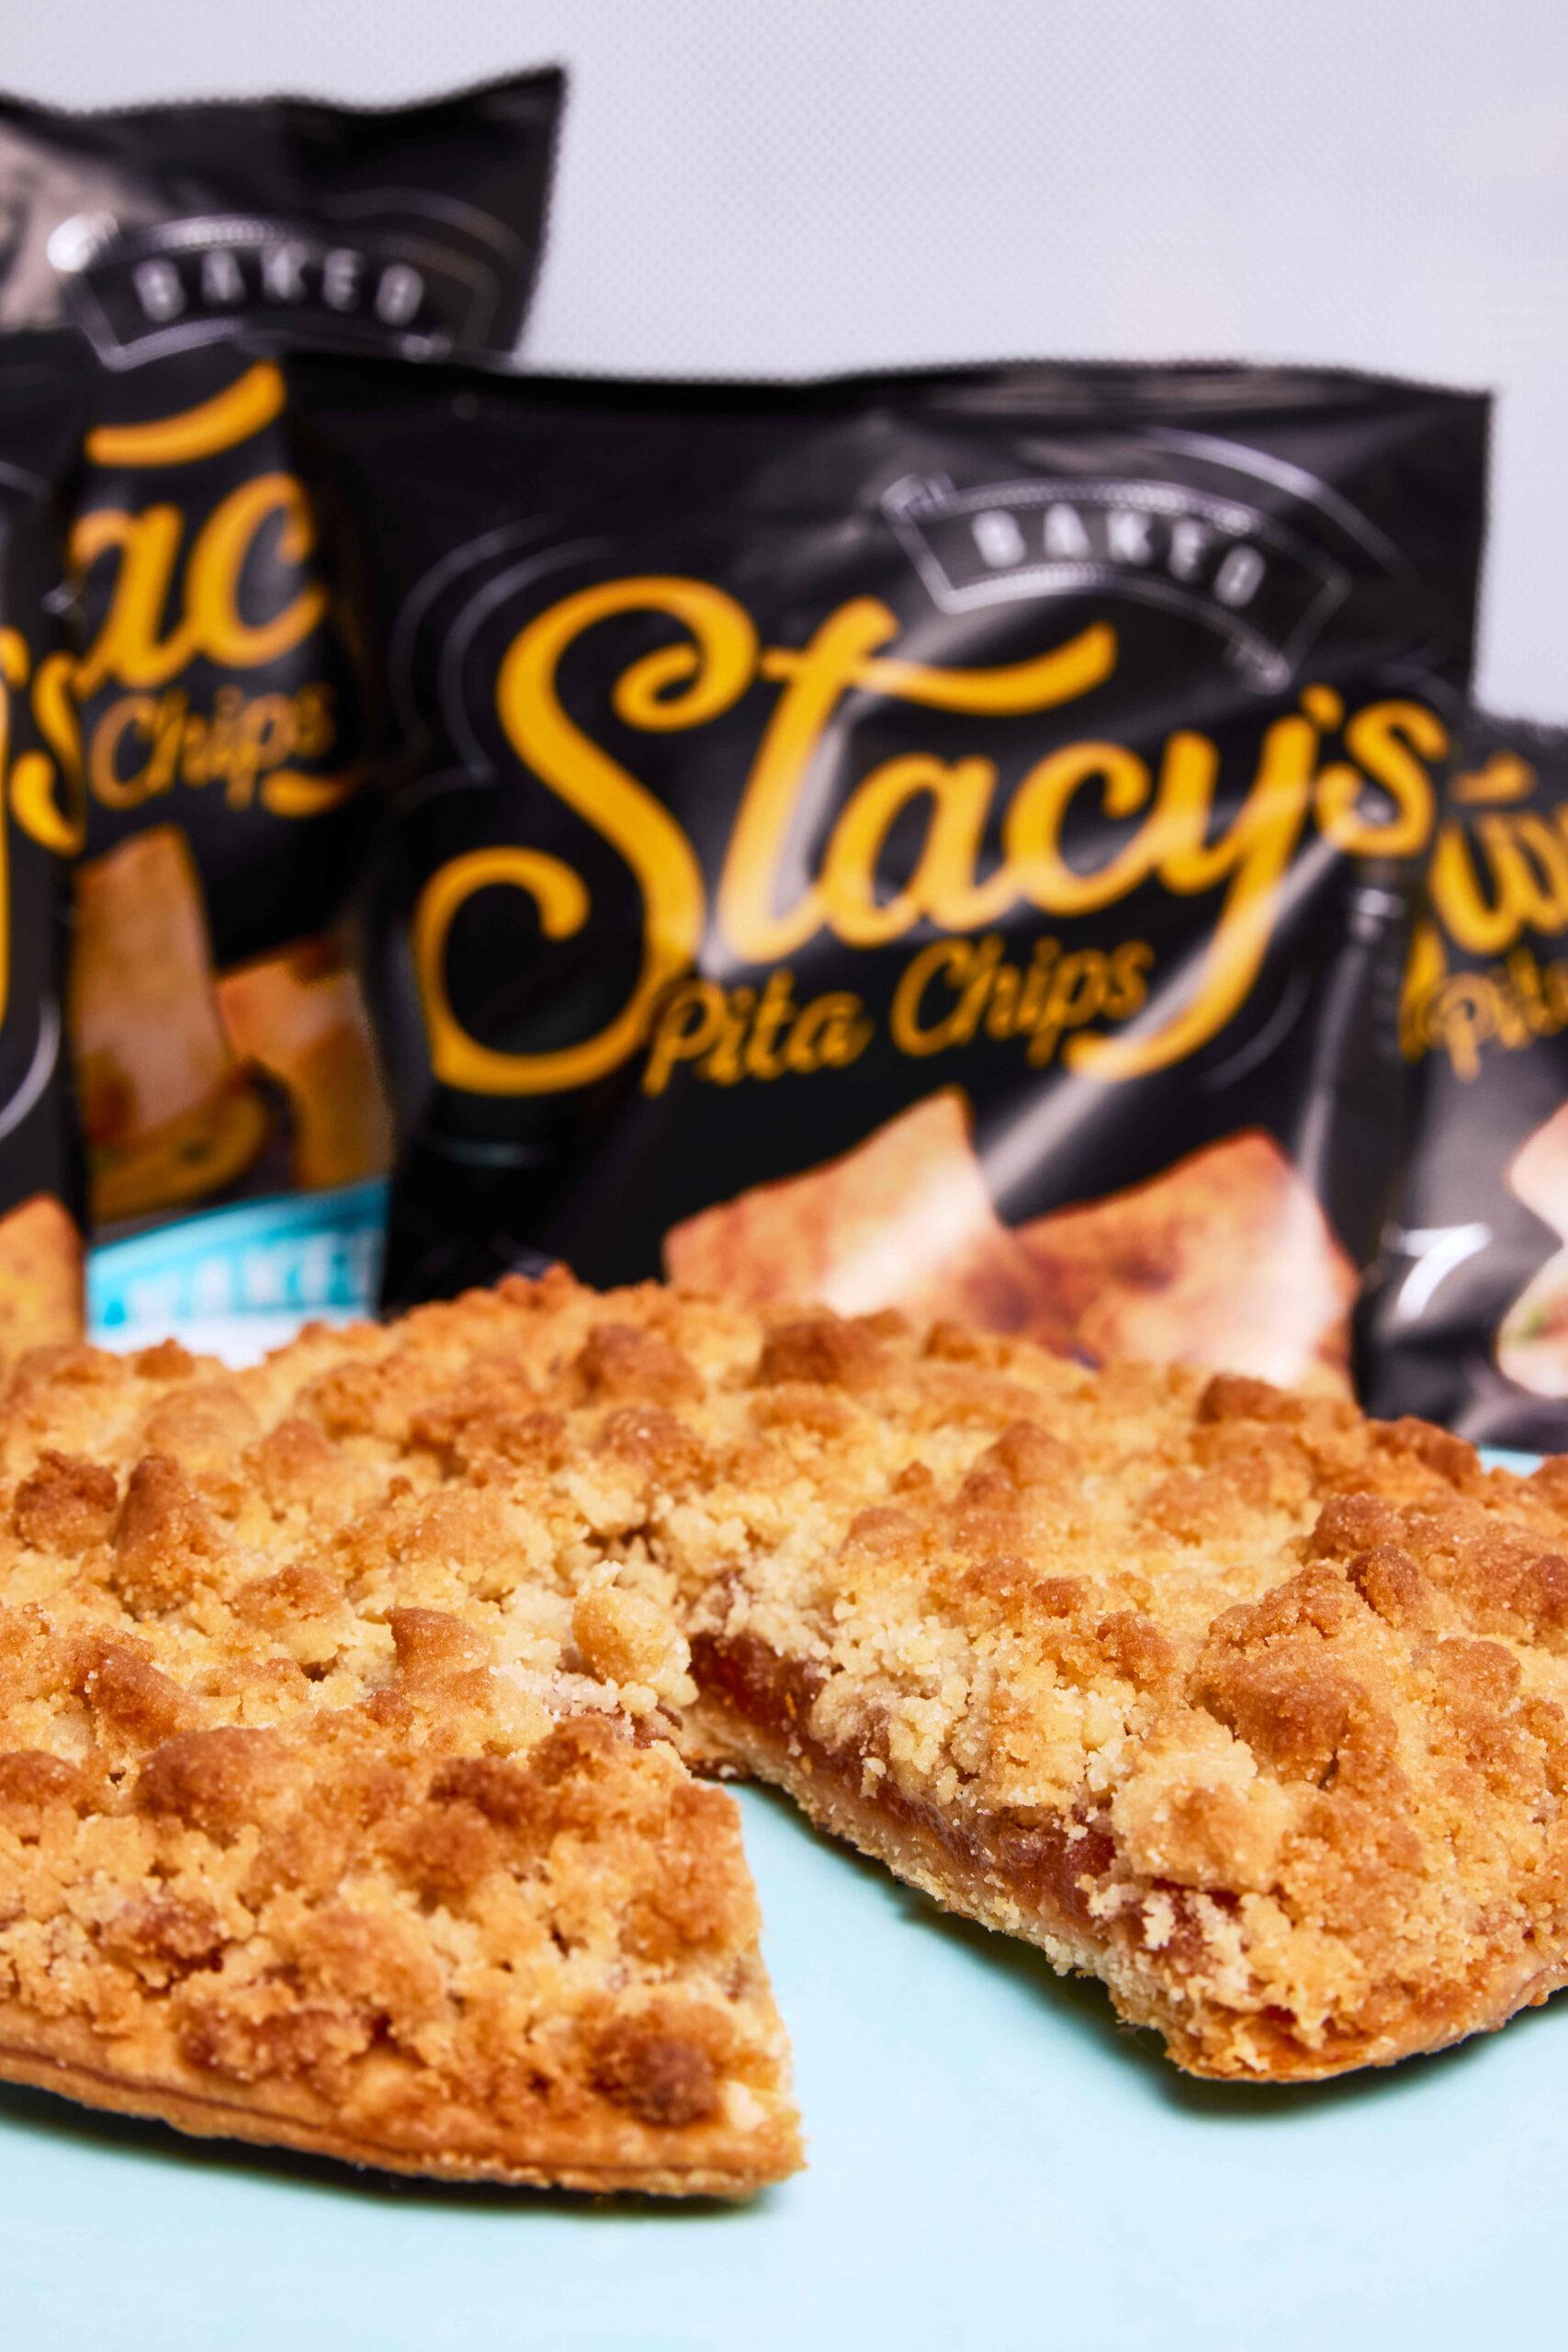 ///Stacys Rise Pies   scaled